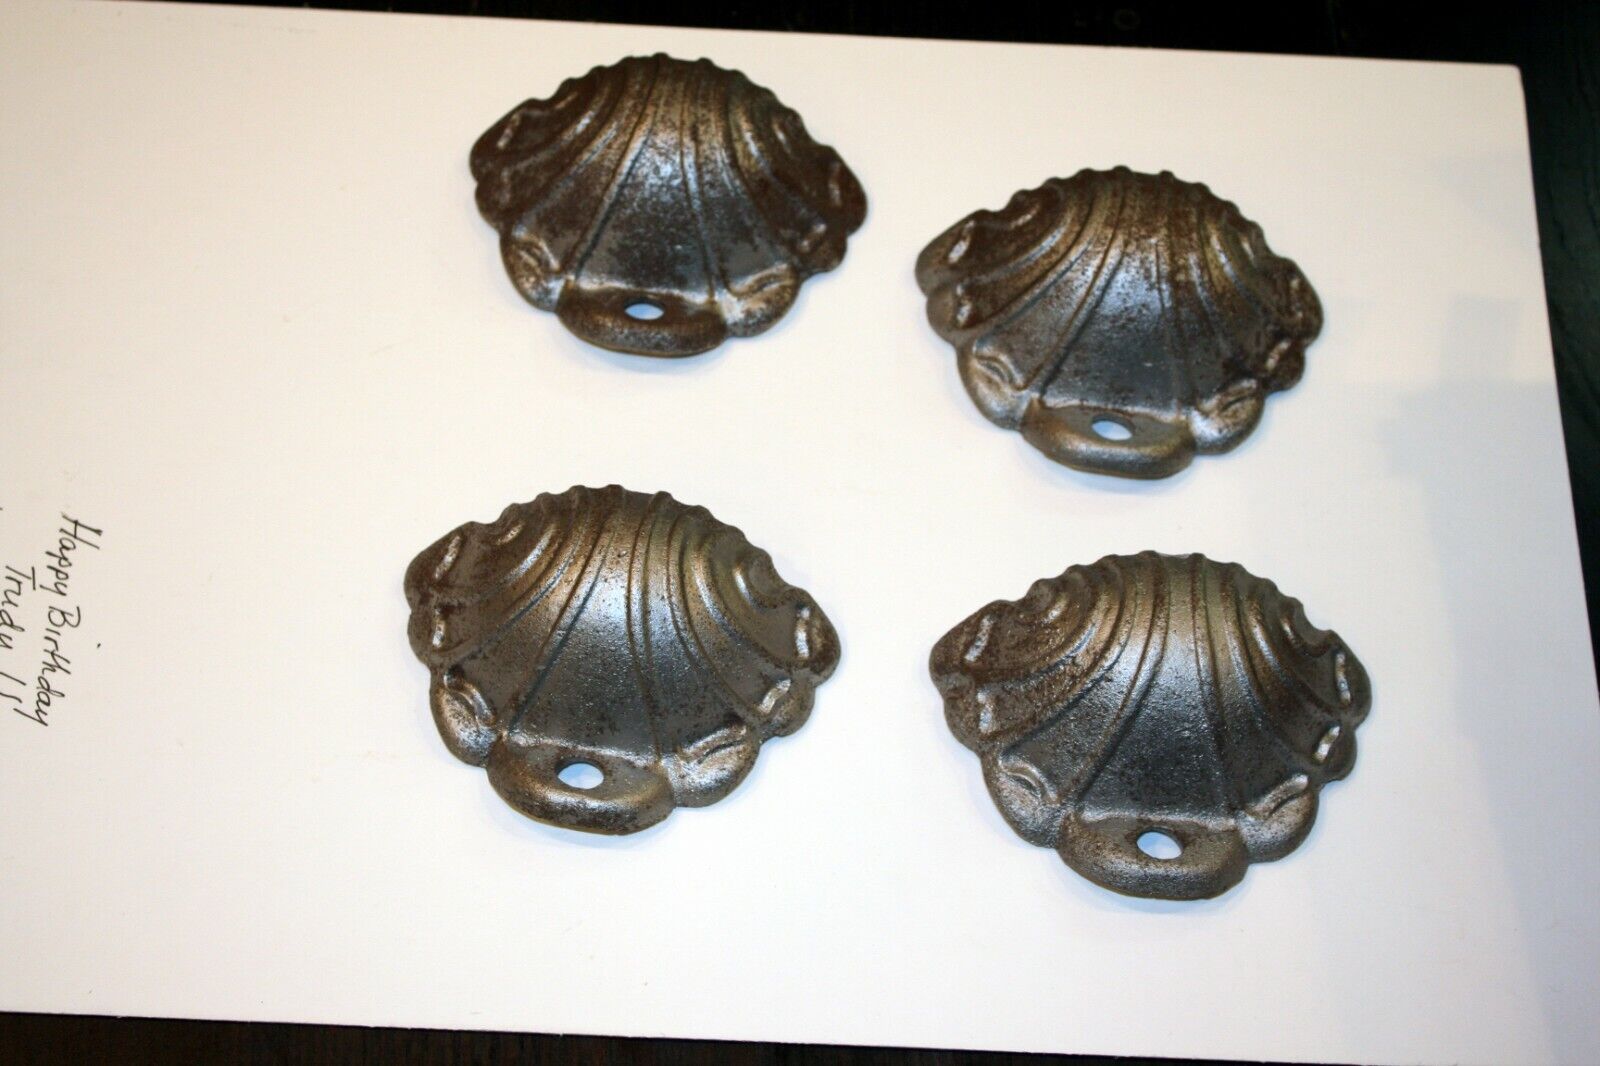 Matched Set of 4 Antique Cast Iron Corner Covers Parlor Stove Parts. Very Nice!! Unbranded